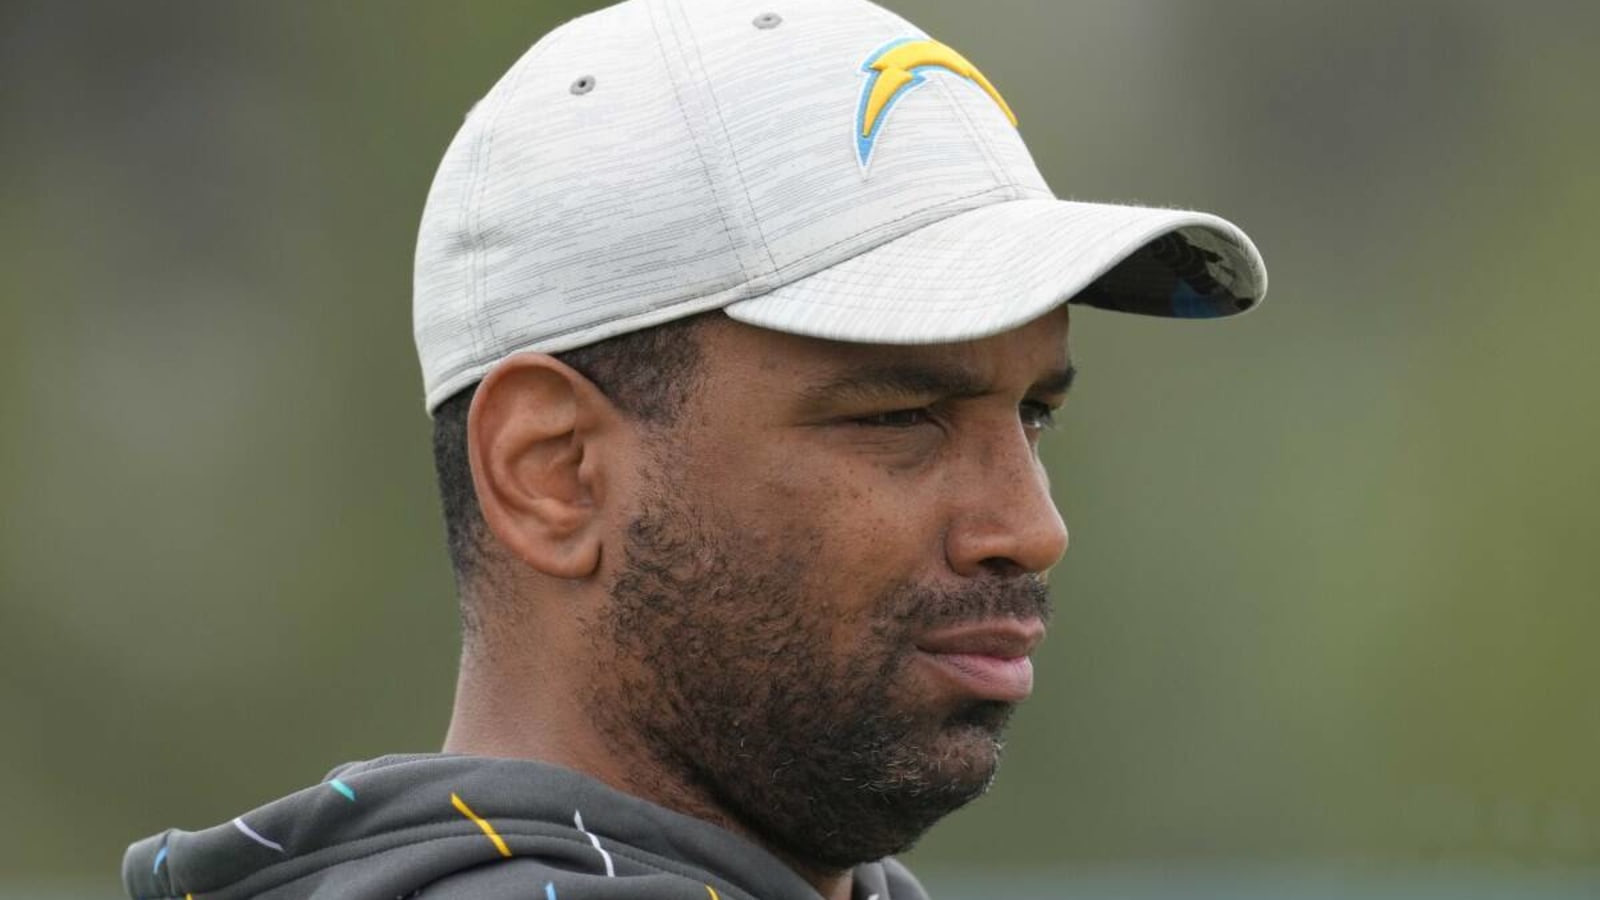 Raiders expected to hire former Chargers director of player personnel JoJo Wooden